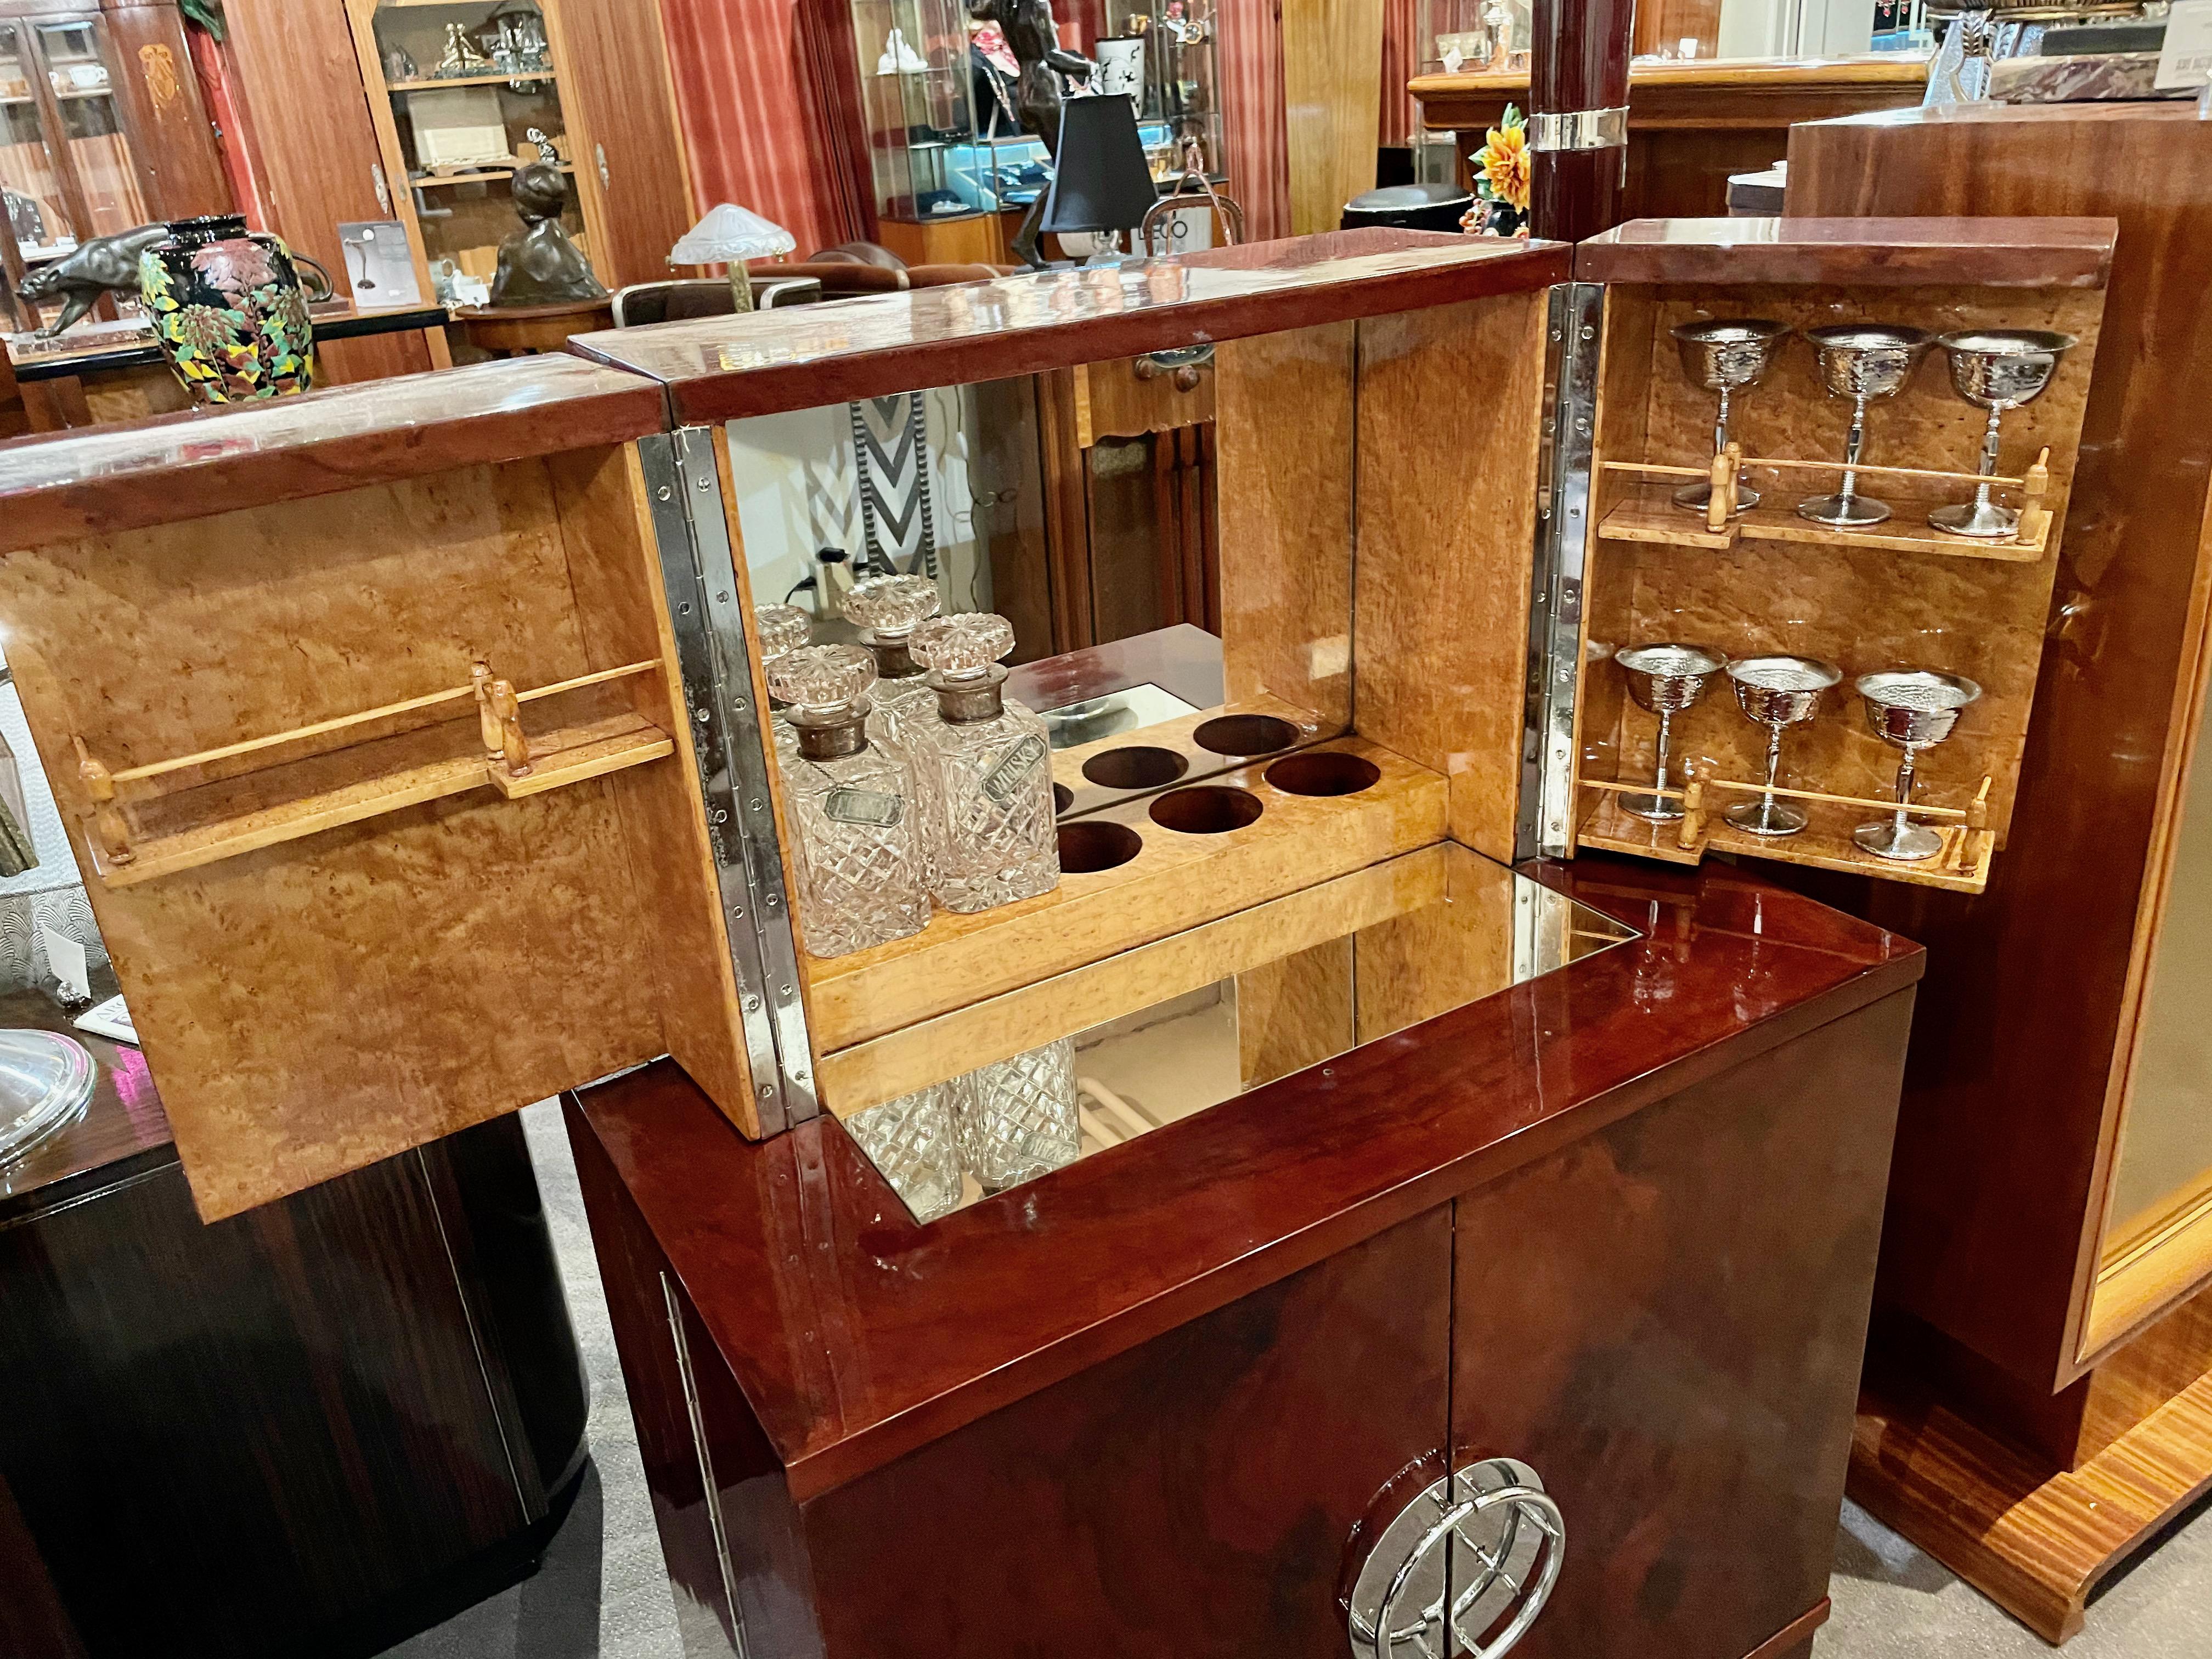 Art Deco Modern French double decker bar. Custom design in spectacular woods inside and out. Interior of solid finished wood in a burl honey-colored maple wood. Even the shelves and cup rails are all in wood. Super quality. This would make a great